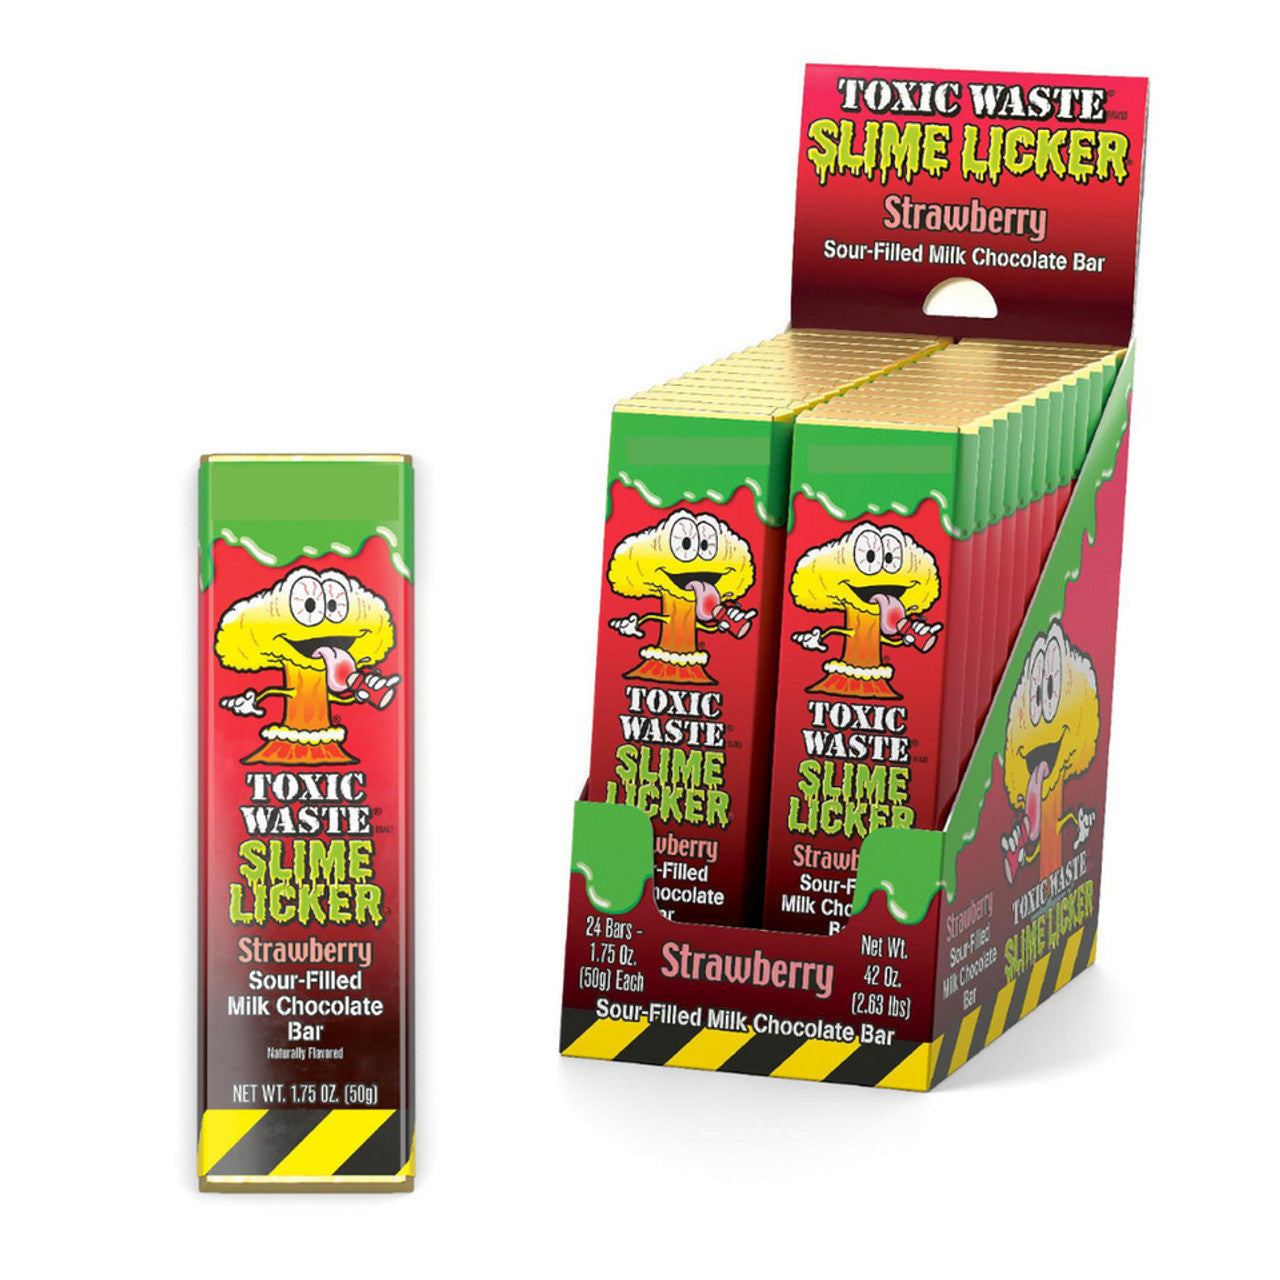 Toxic Waste Slime Licker Strawberry Chocolate Bar 1.75oz 24 Count